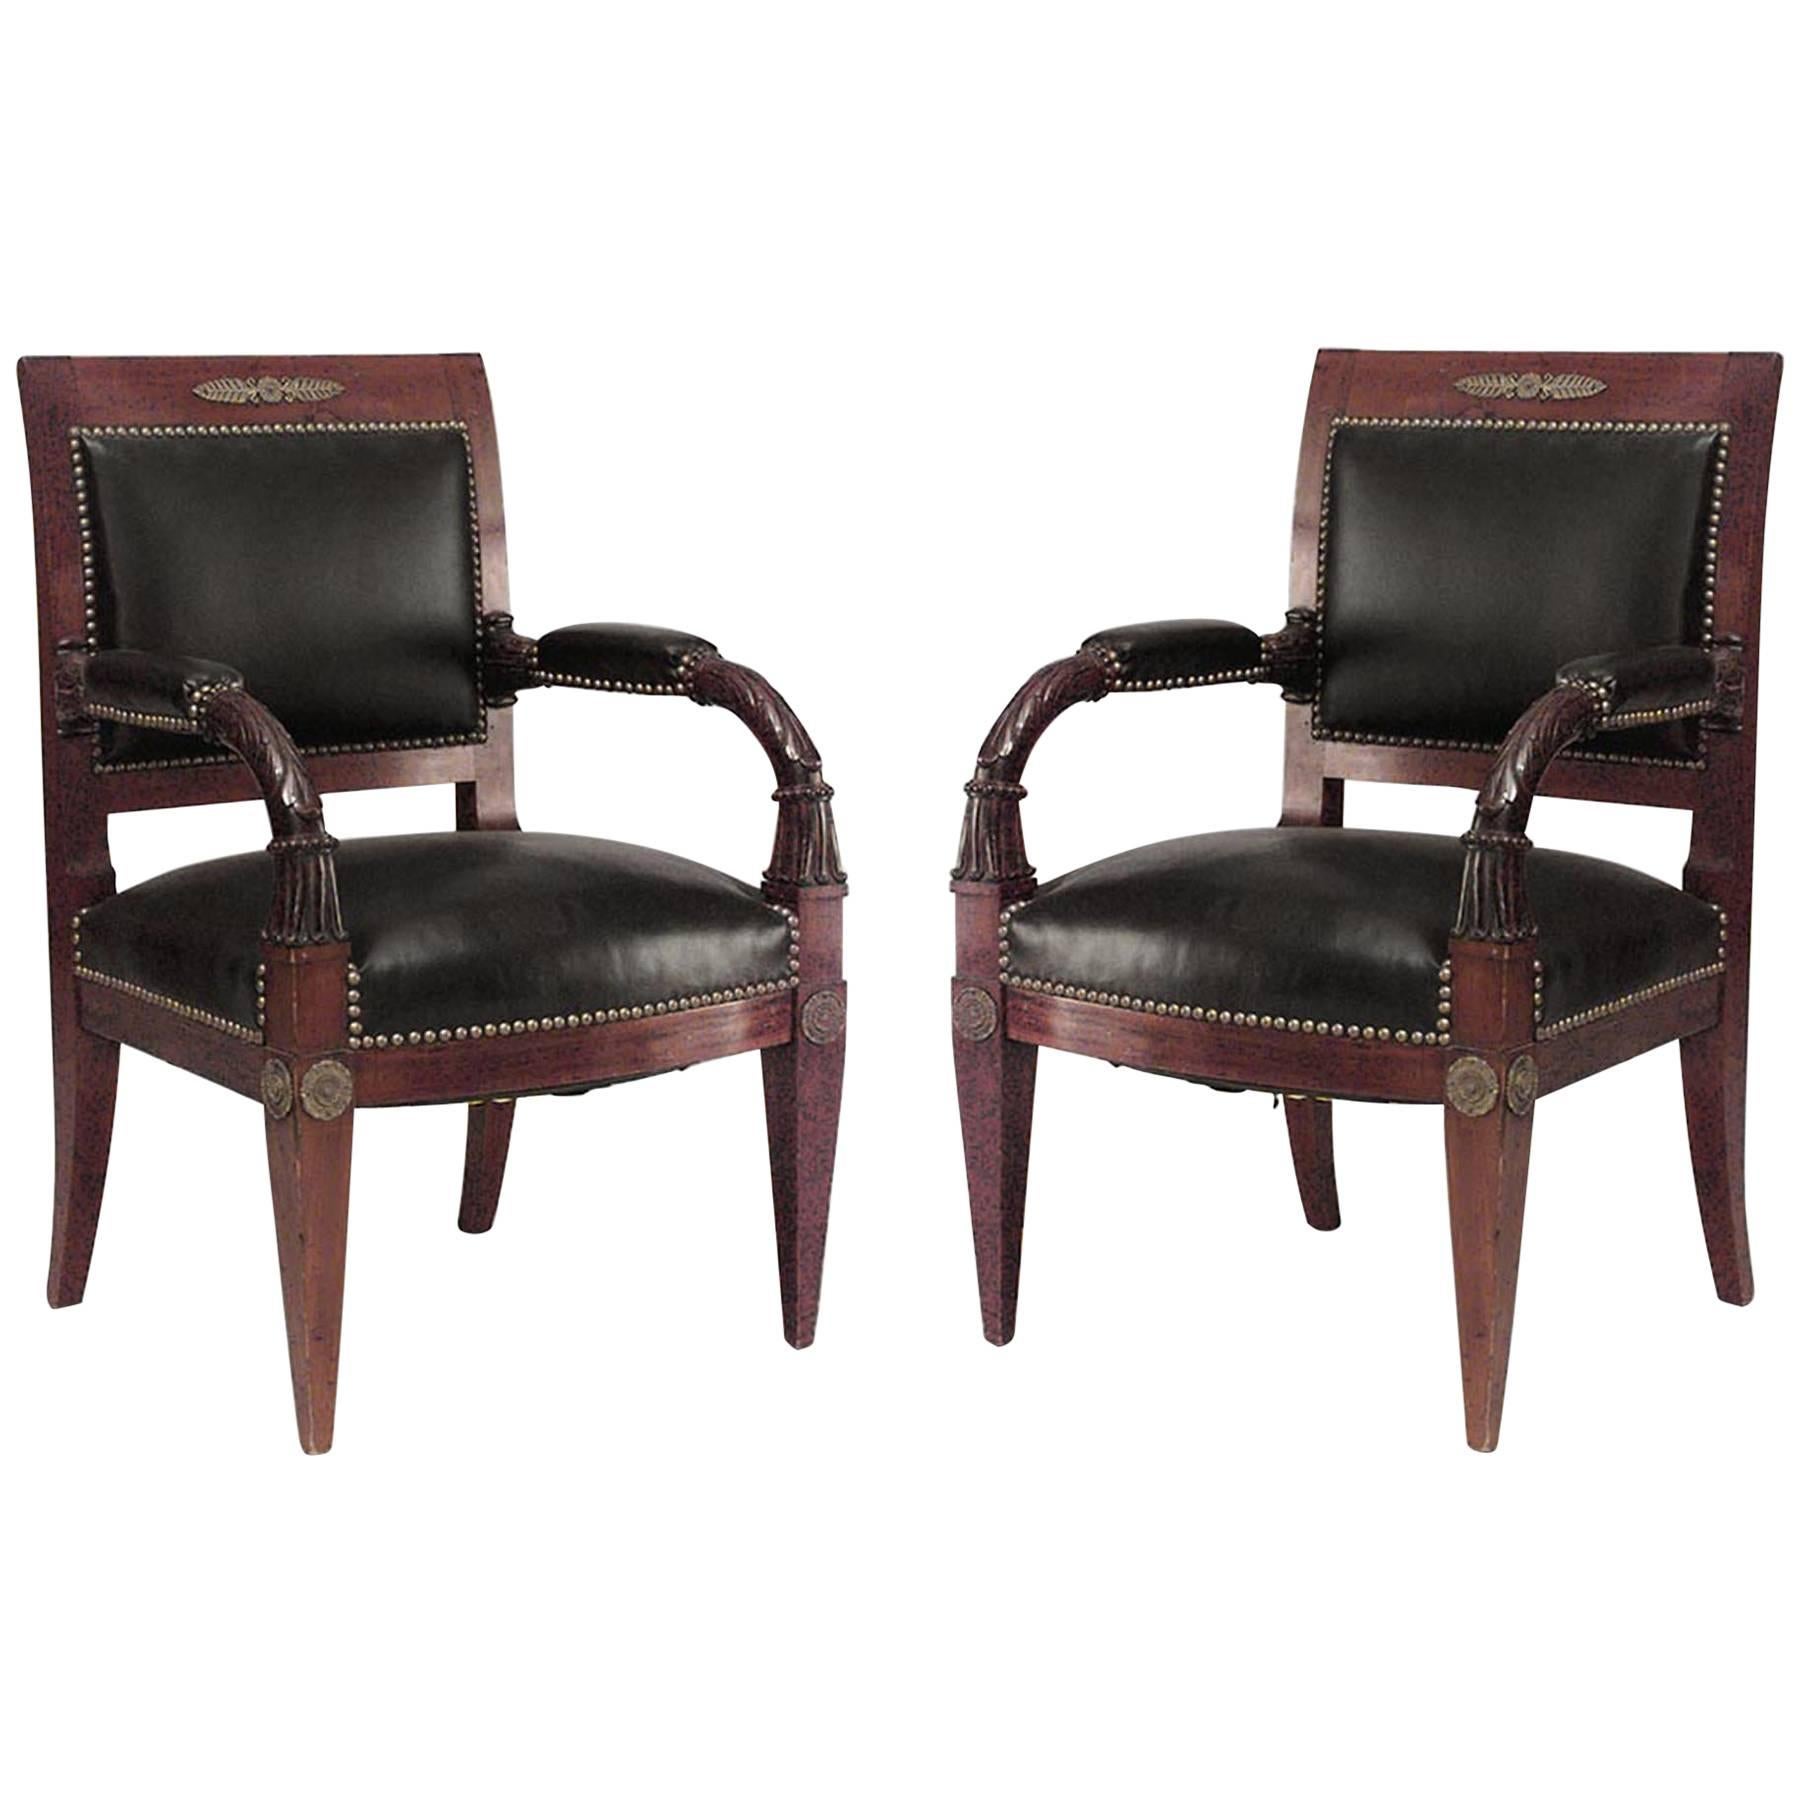 Pair of French Empire Mahogany Leather Armchairs